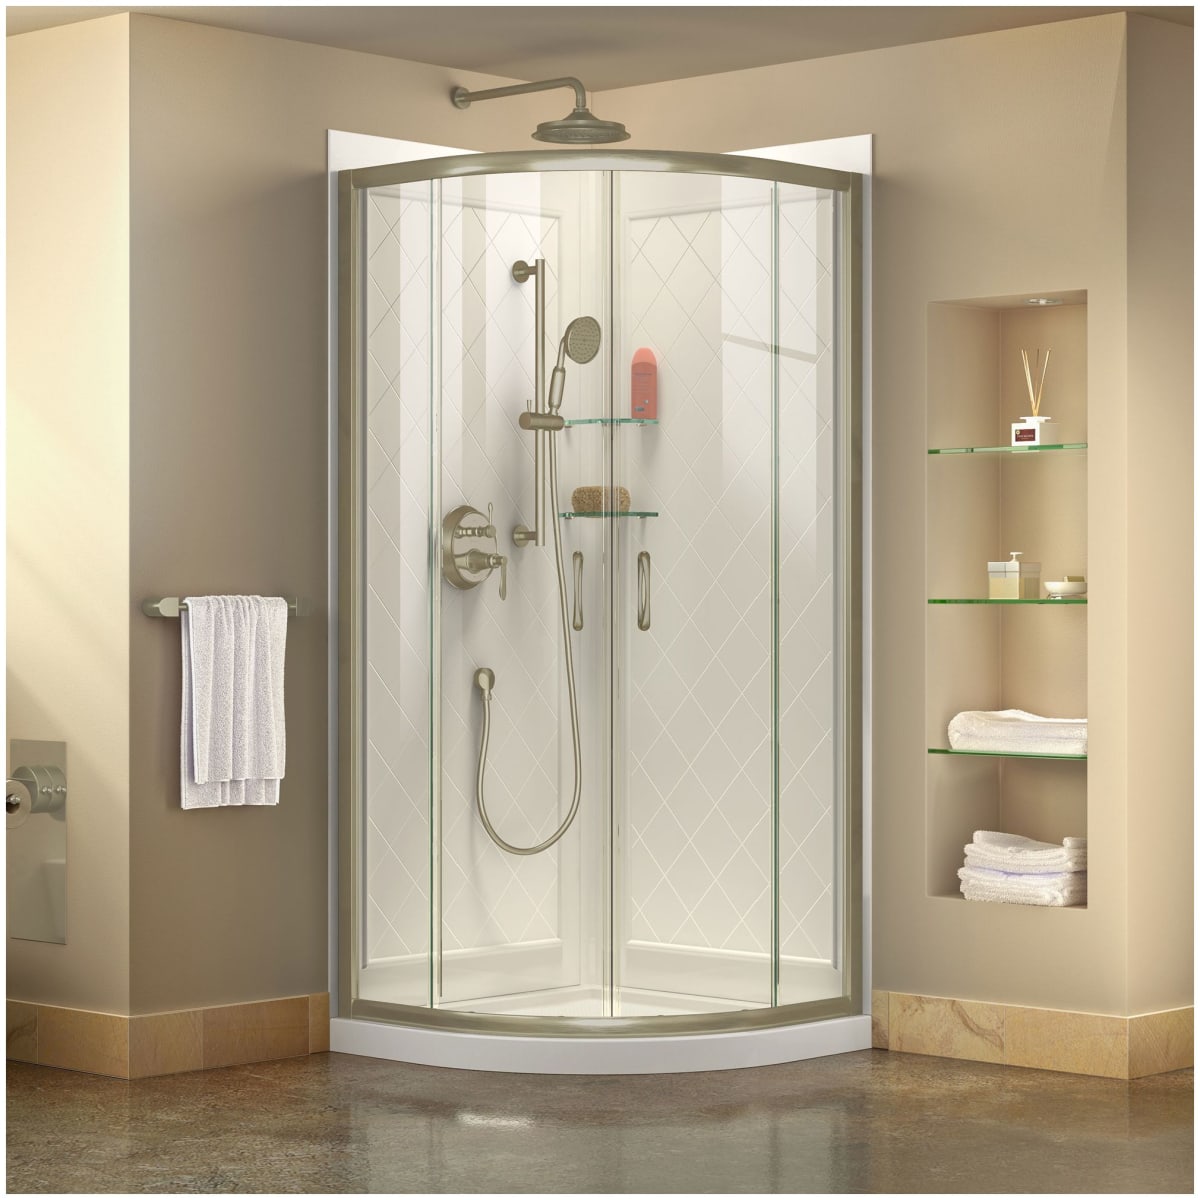 Dreamline Prime 33 In D X W 76 3 4 H Clear Sliding Shower Enclosure Chrome With White Acrylic Base And Backwall Dl 6152 01cl, Corner Shower Round Sliding Door